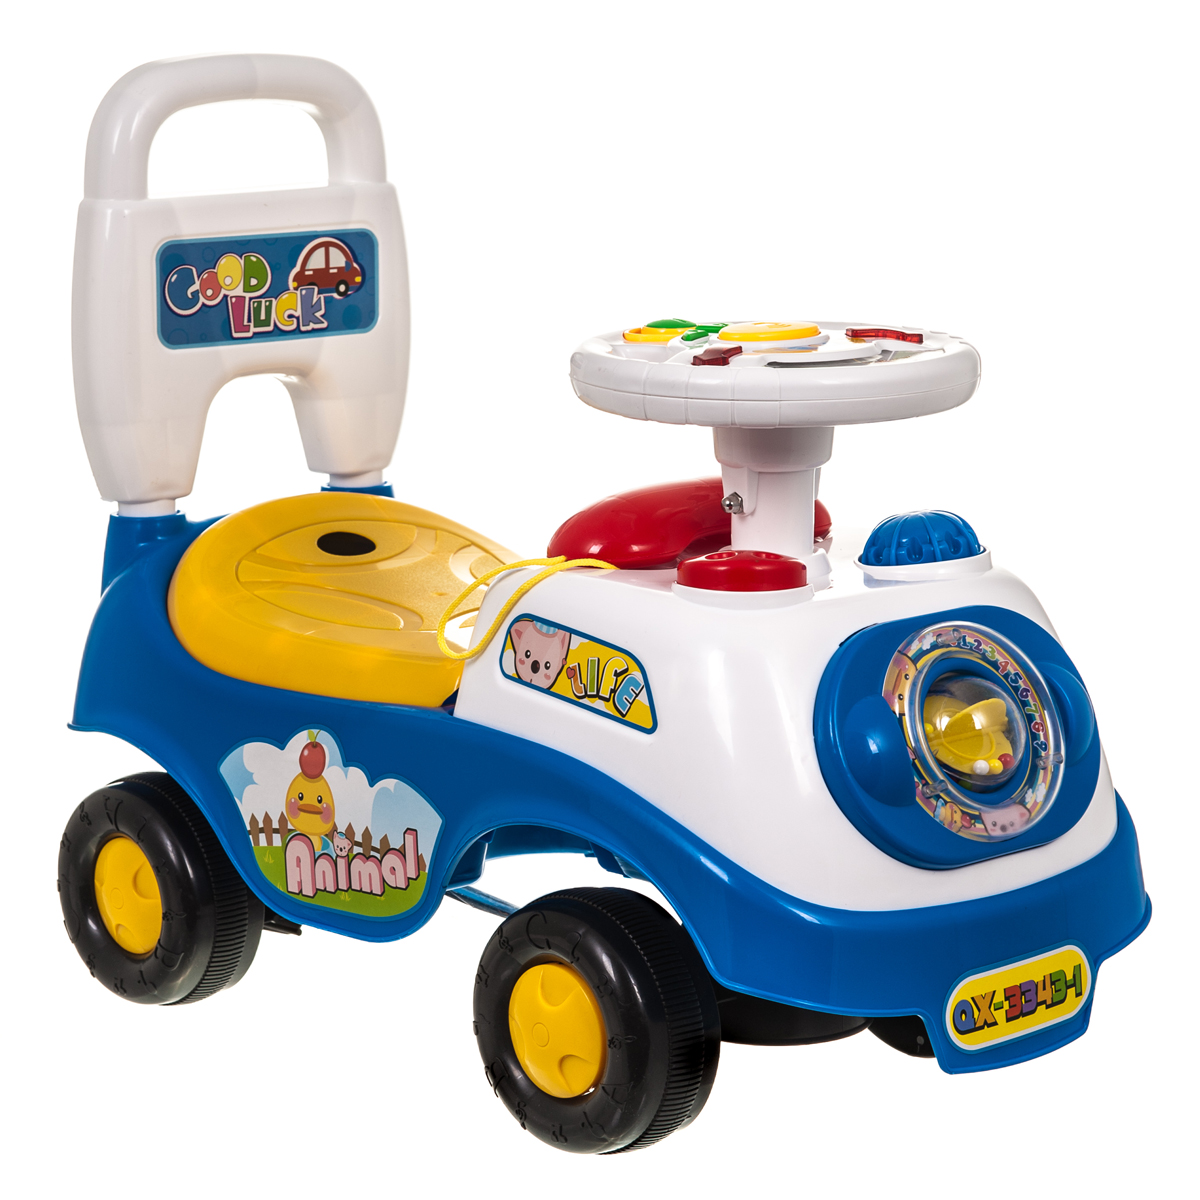 cars for baby boy to ride